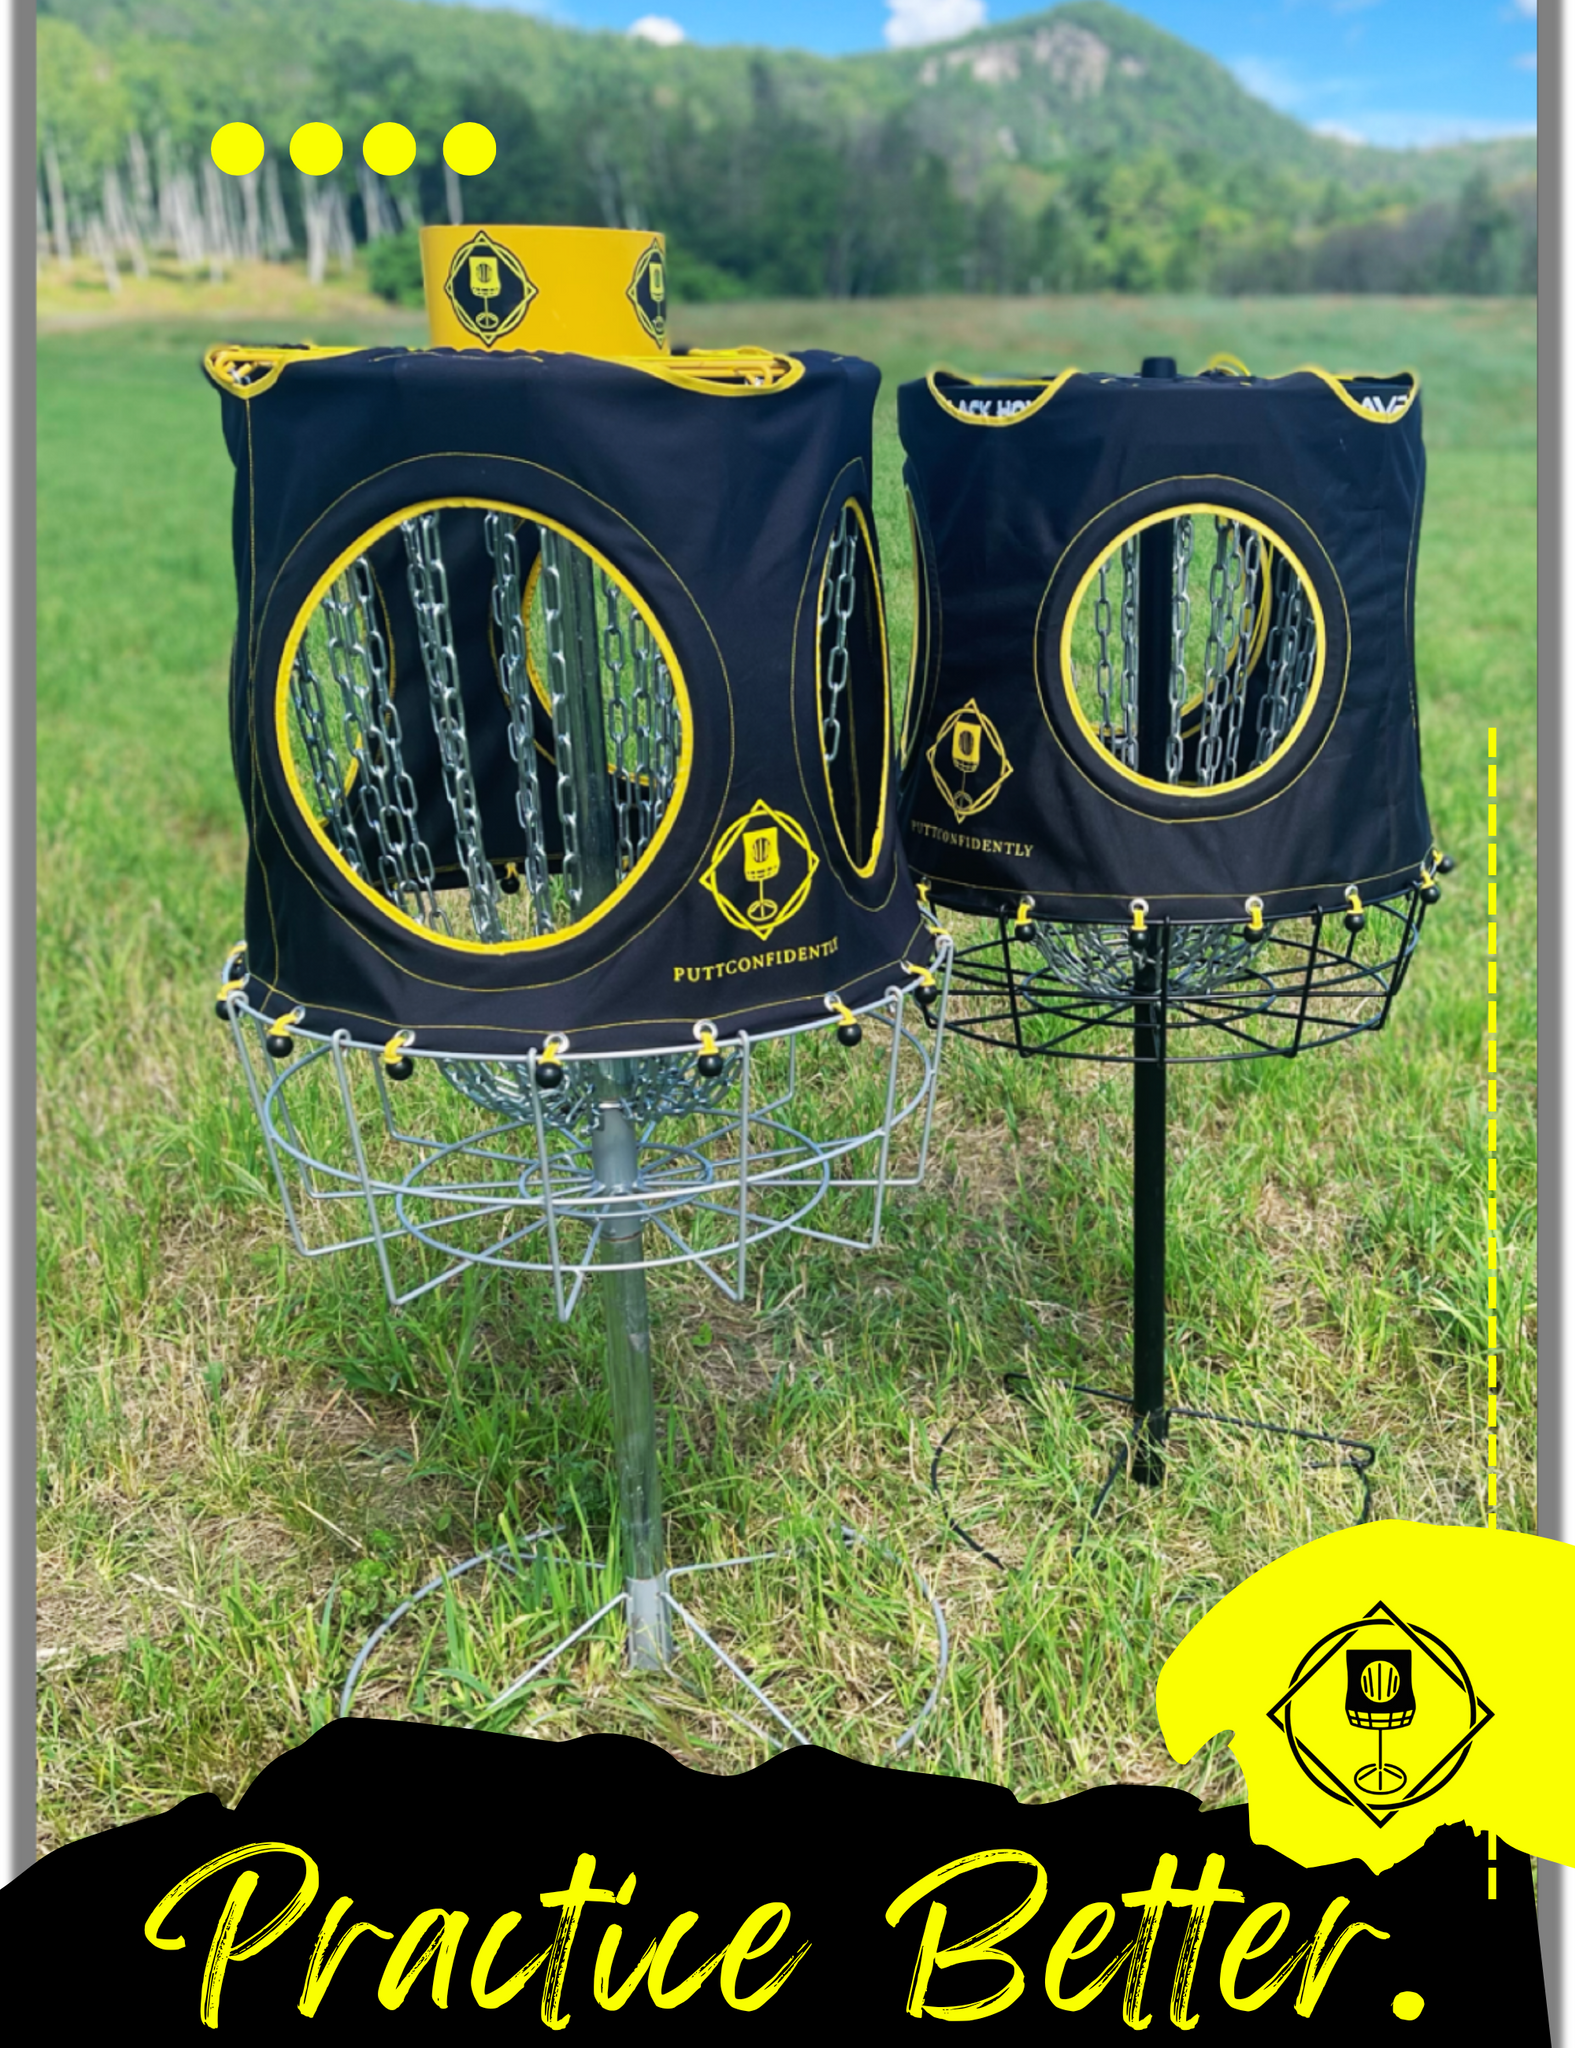 ChampCap Pro    (4 Different Sized Target Zones)